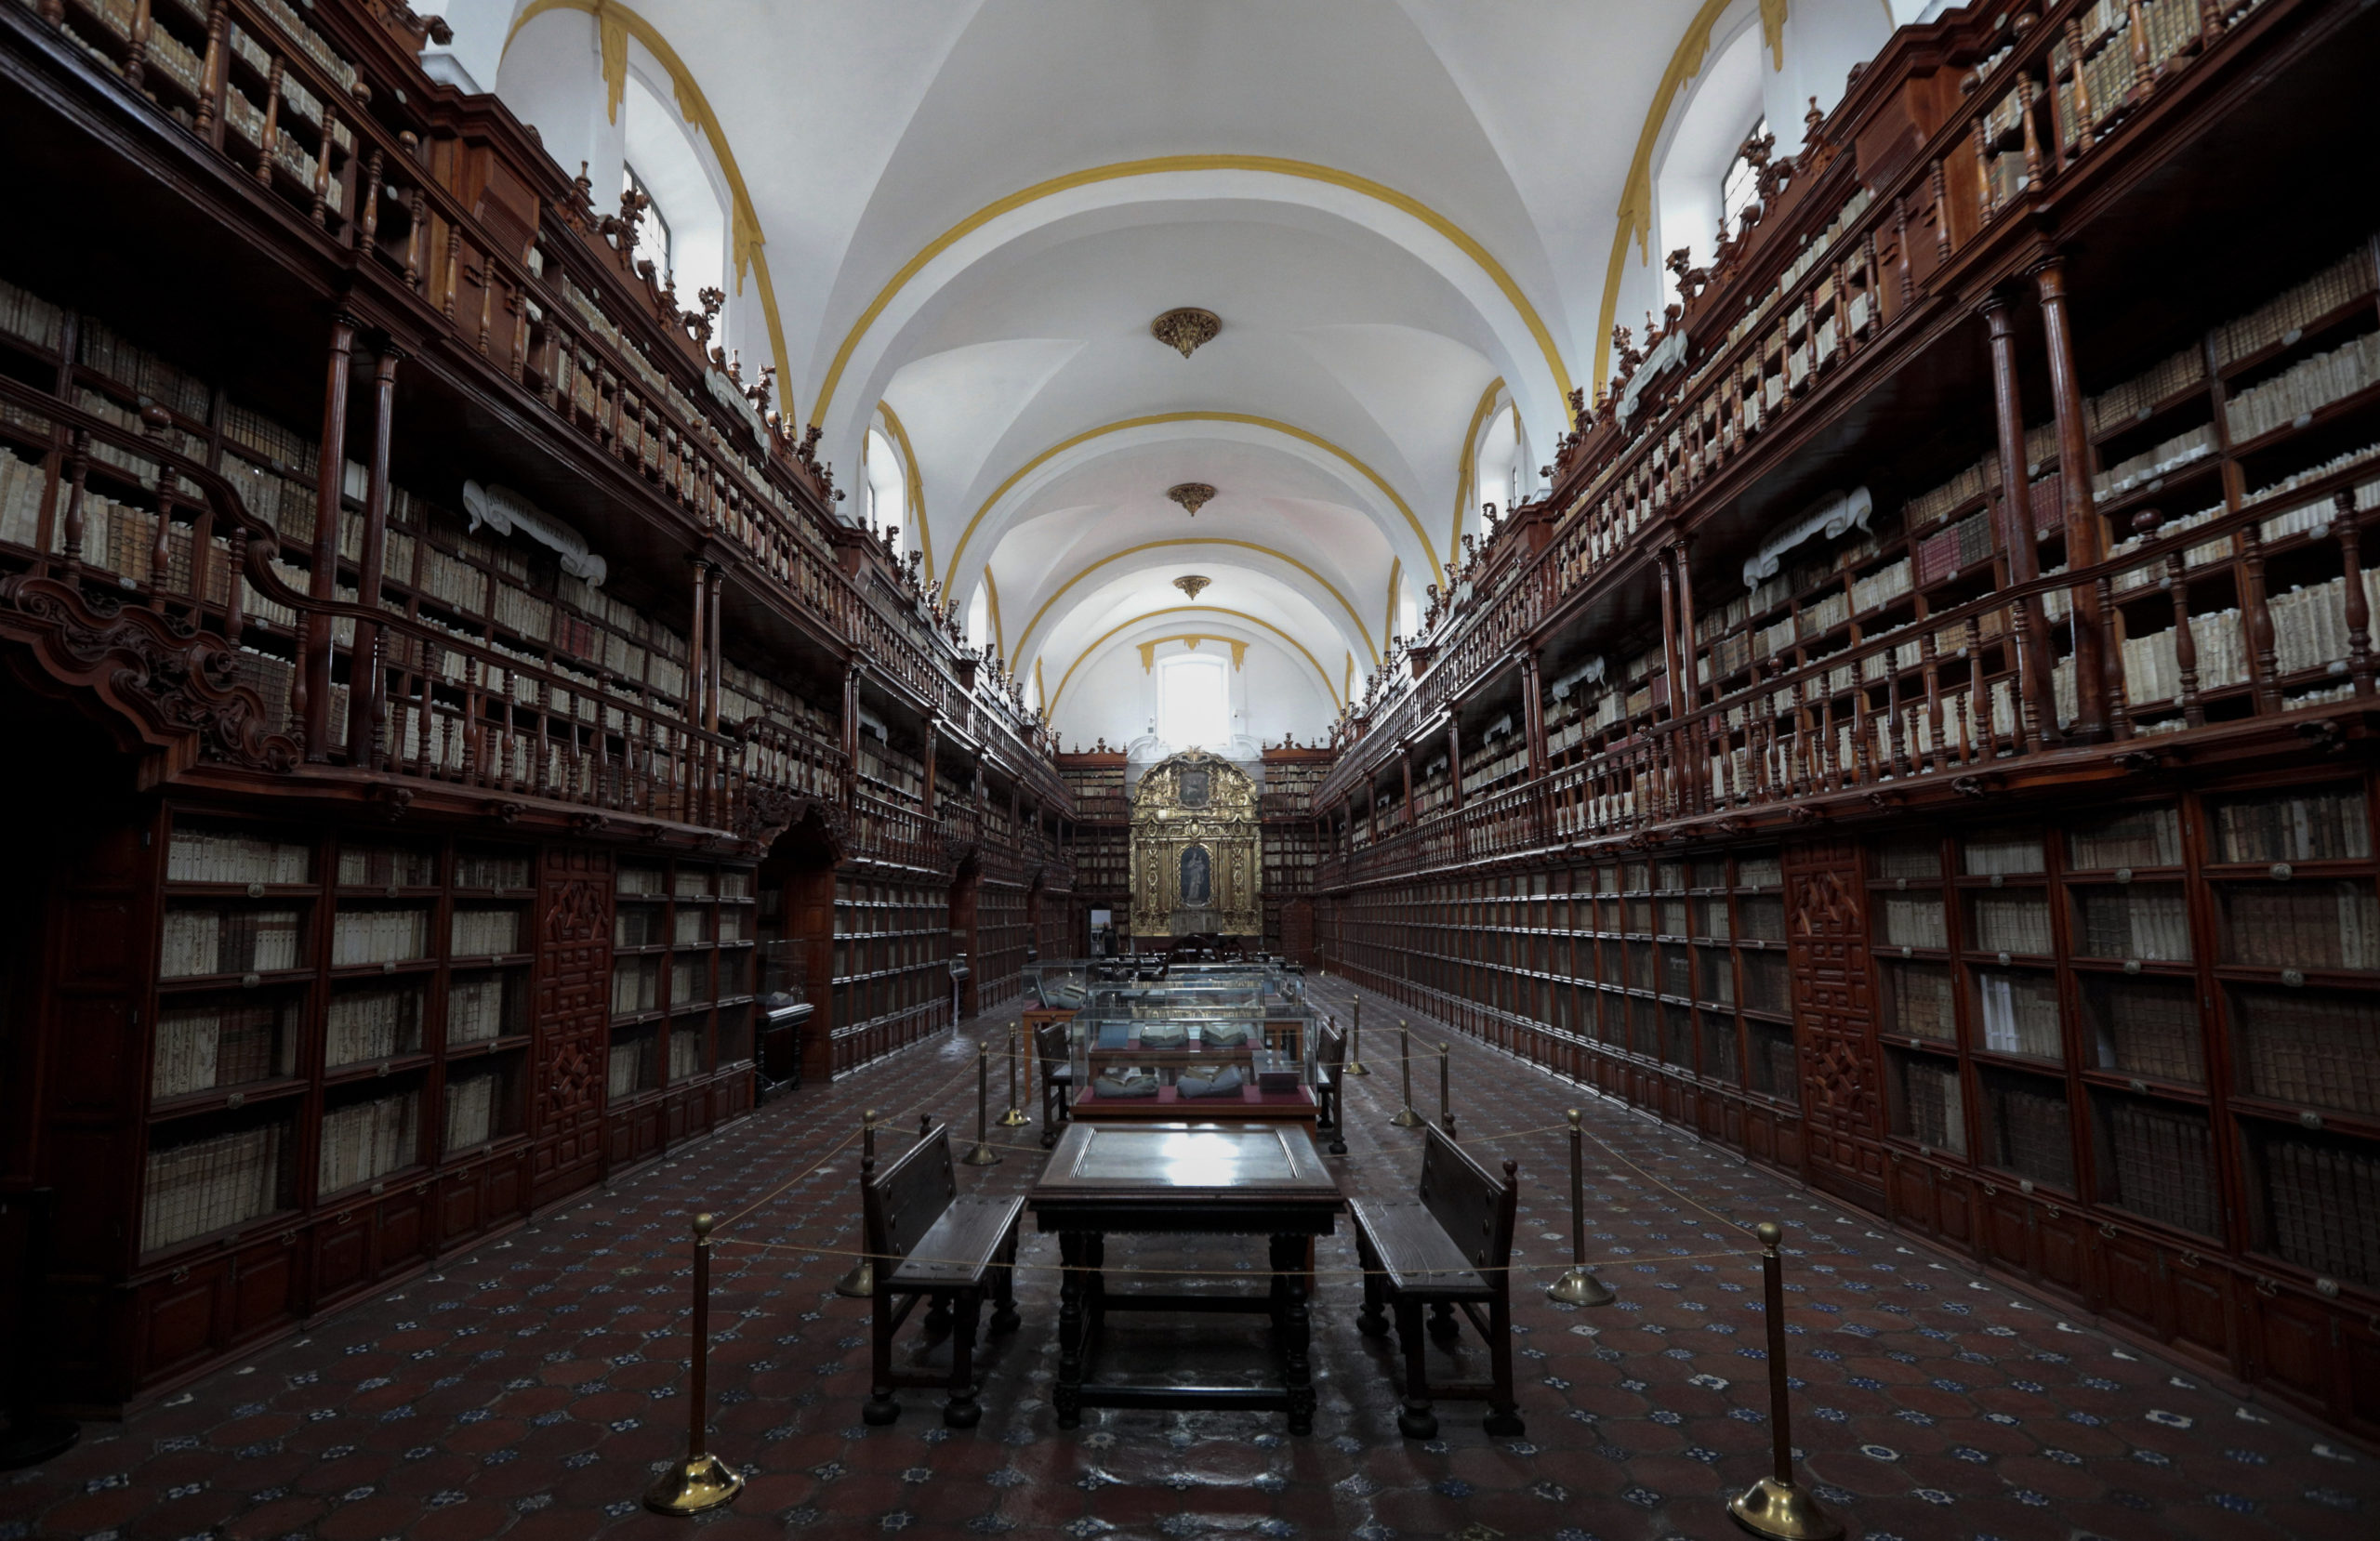 The Palafoxiana library in Puebla, Mexico, is the oldest public library in the Americas, according to UNESCO.